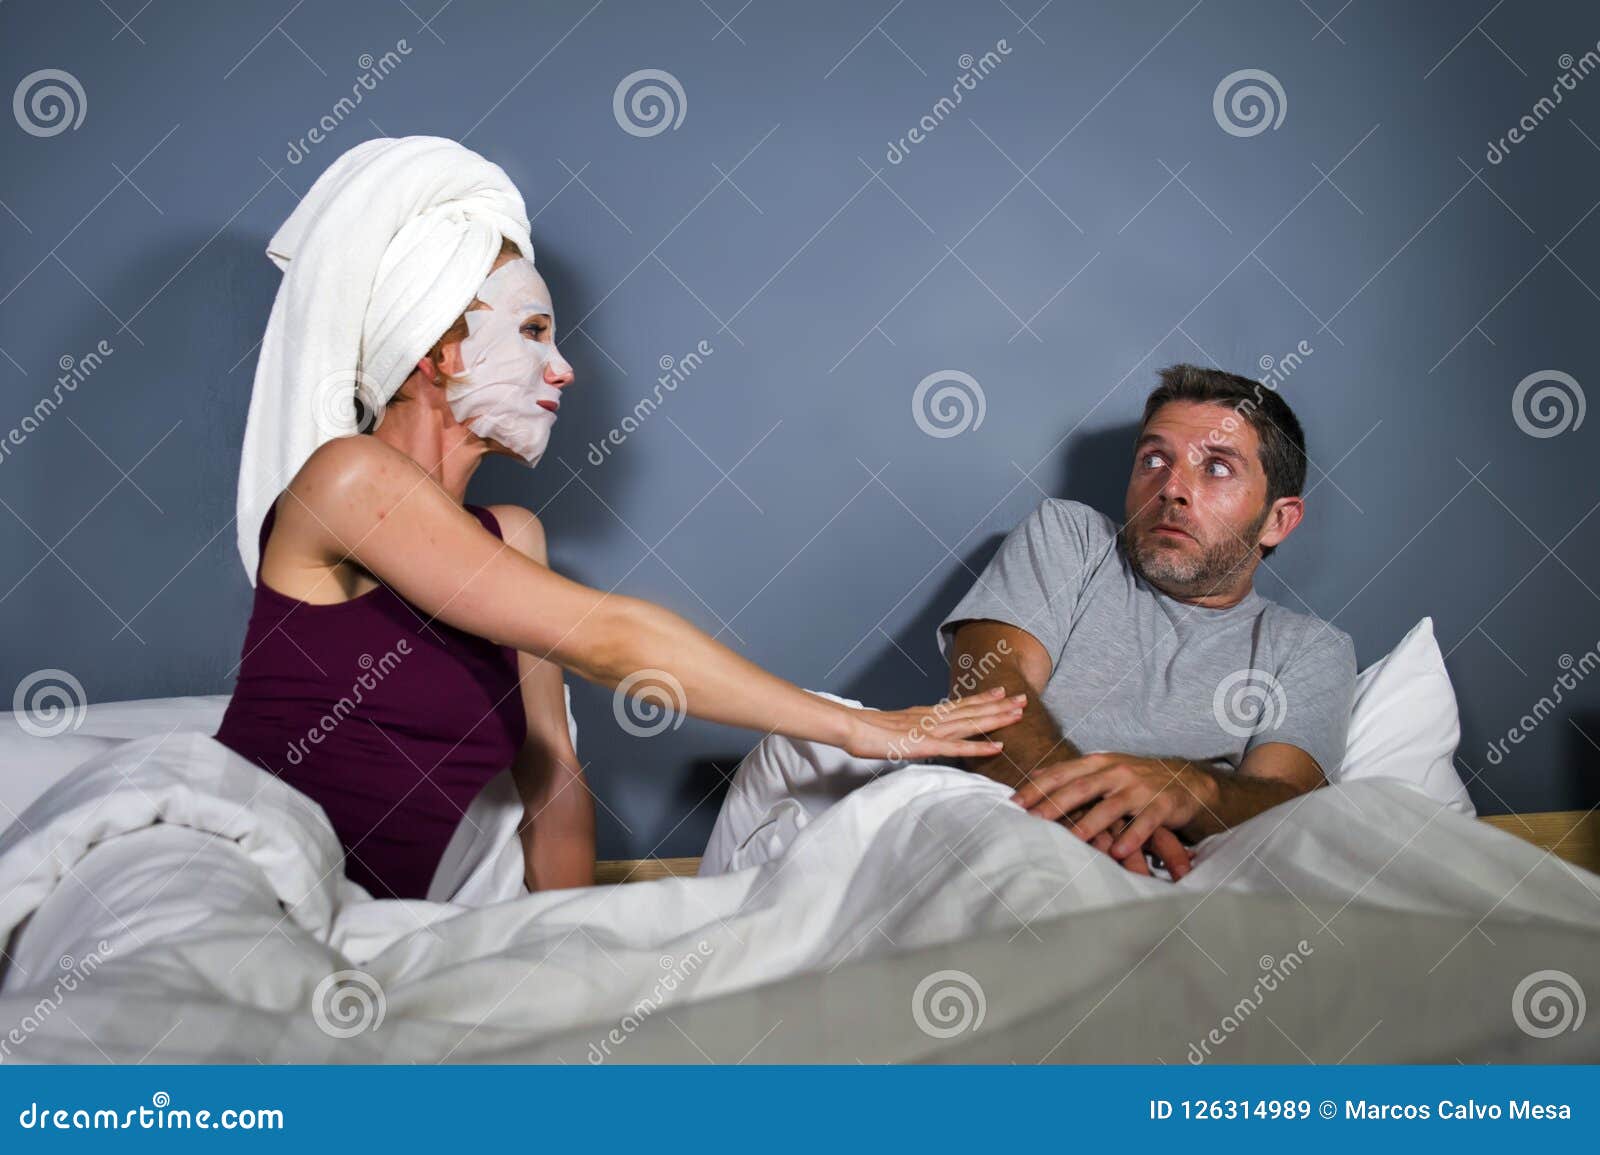 Scared marriage are men why of Marriage: The